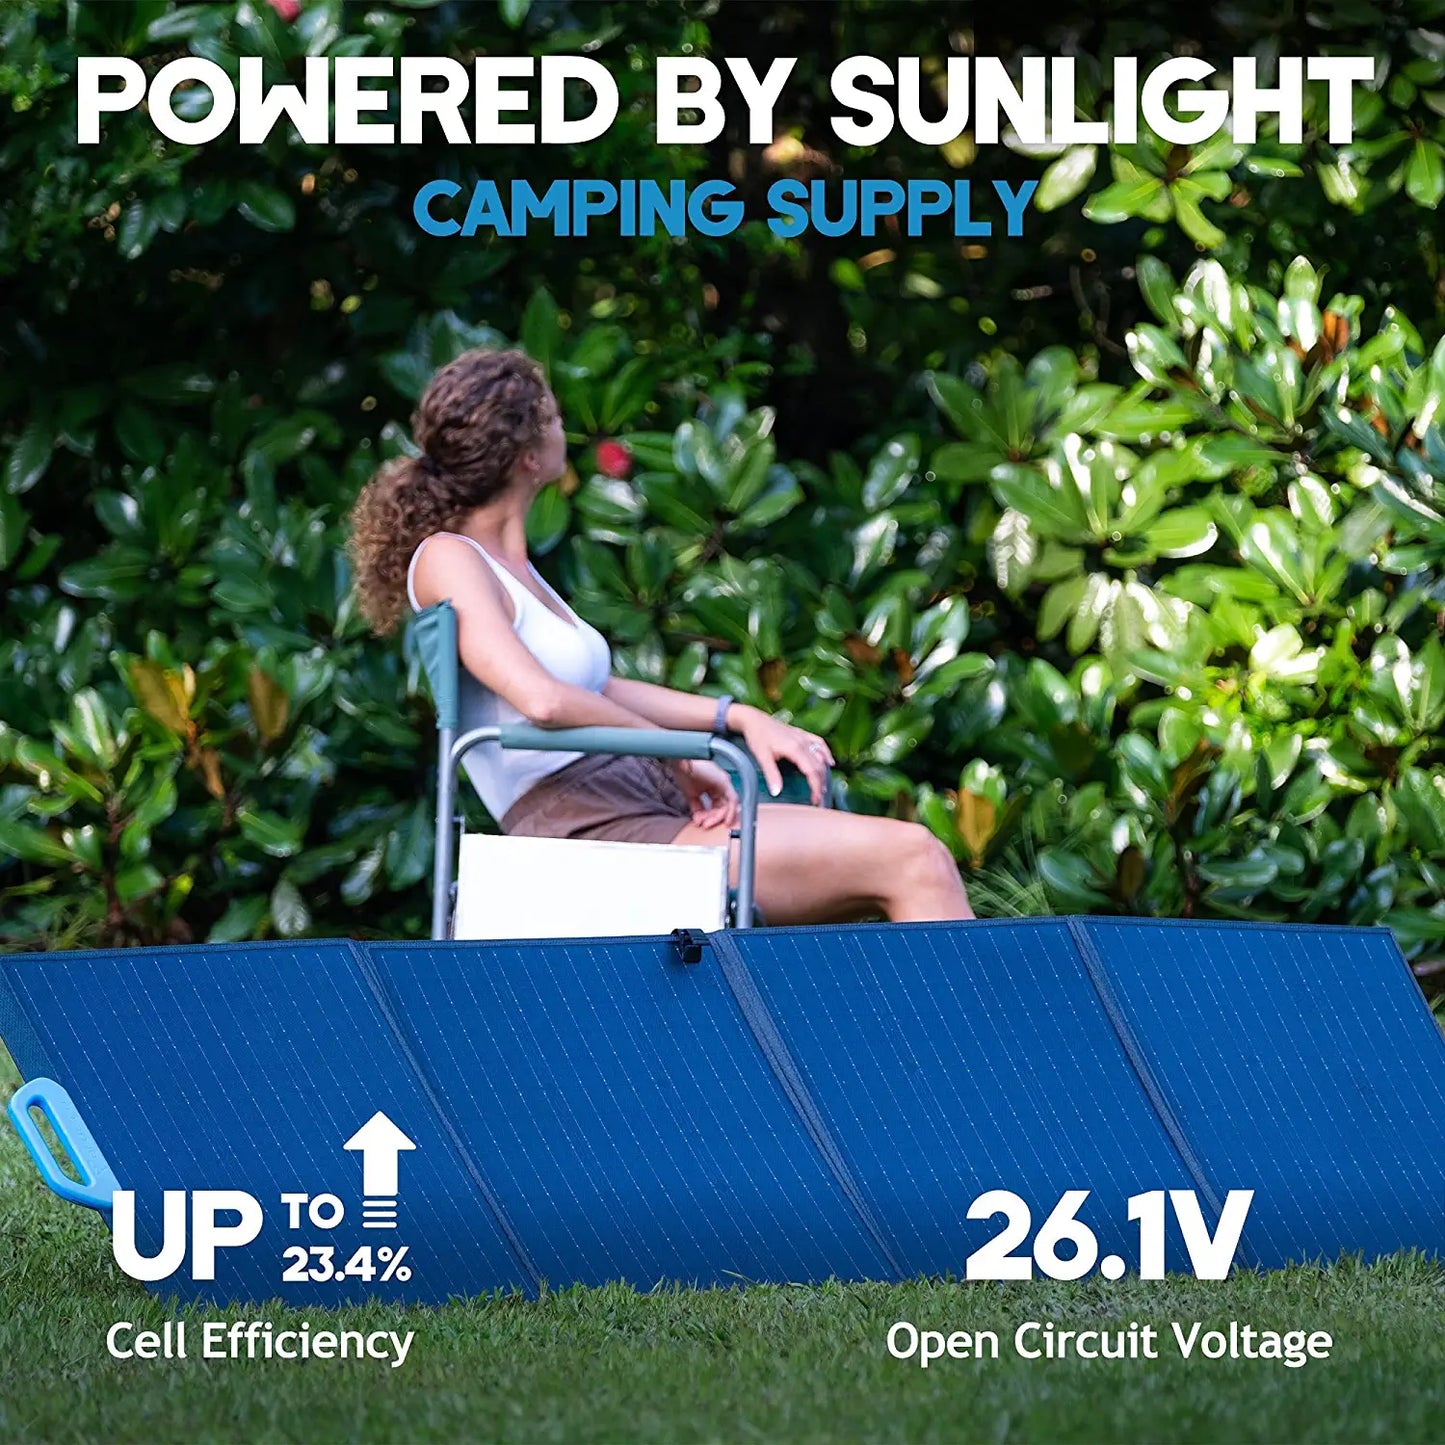 POWERED BY SUNLIGHT CAMPING SUPP